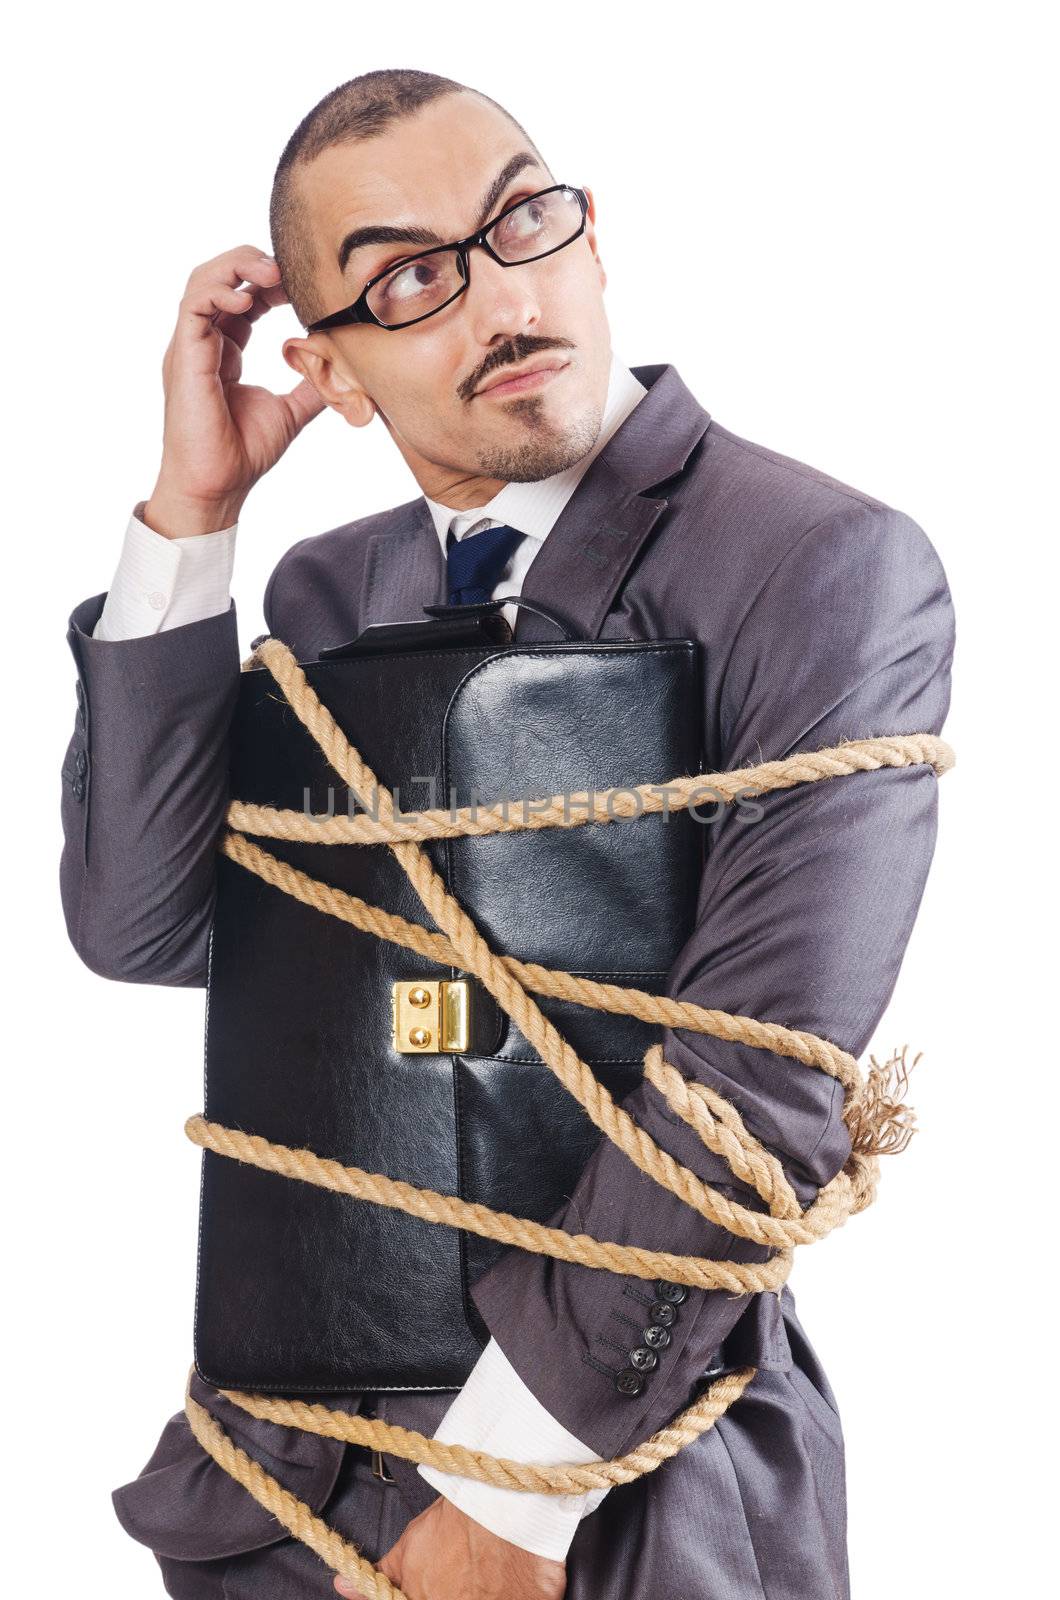 Businessman tied up with rope